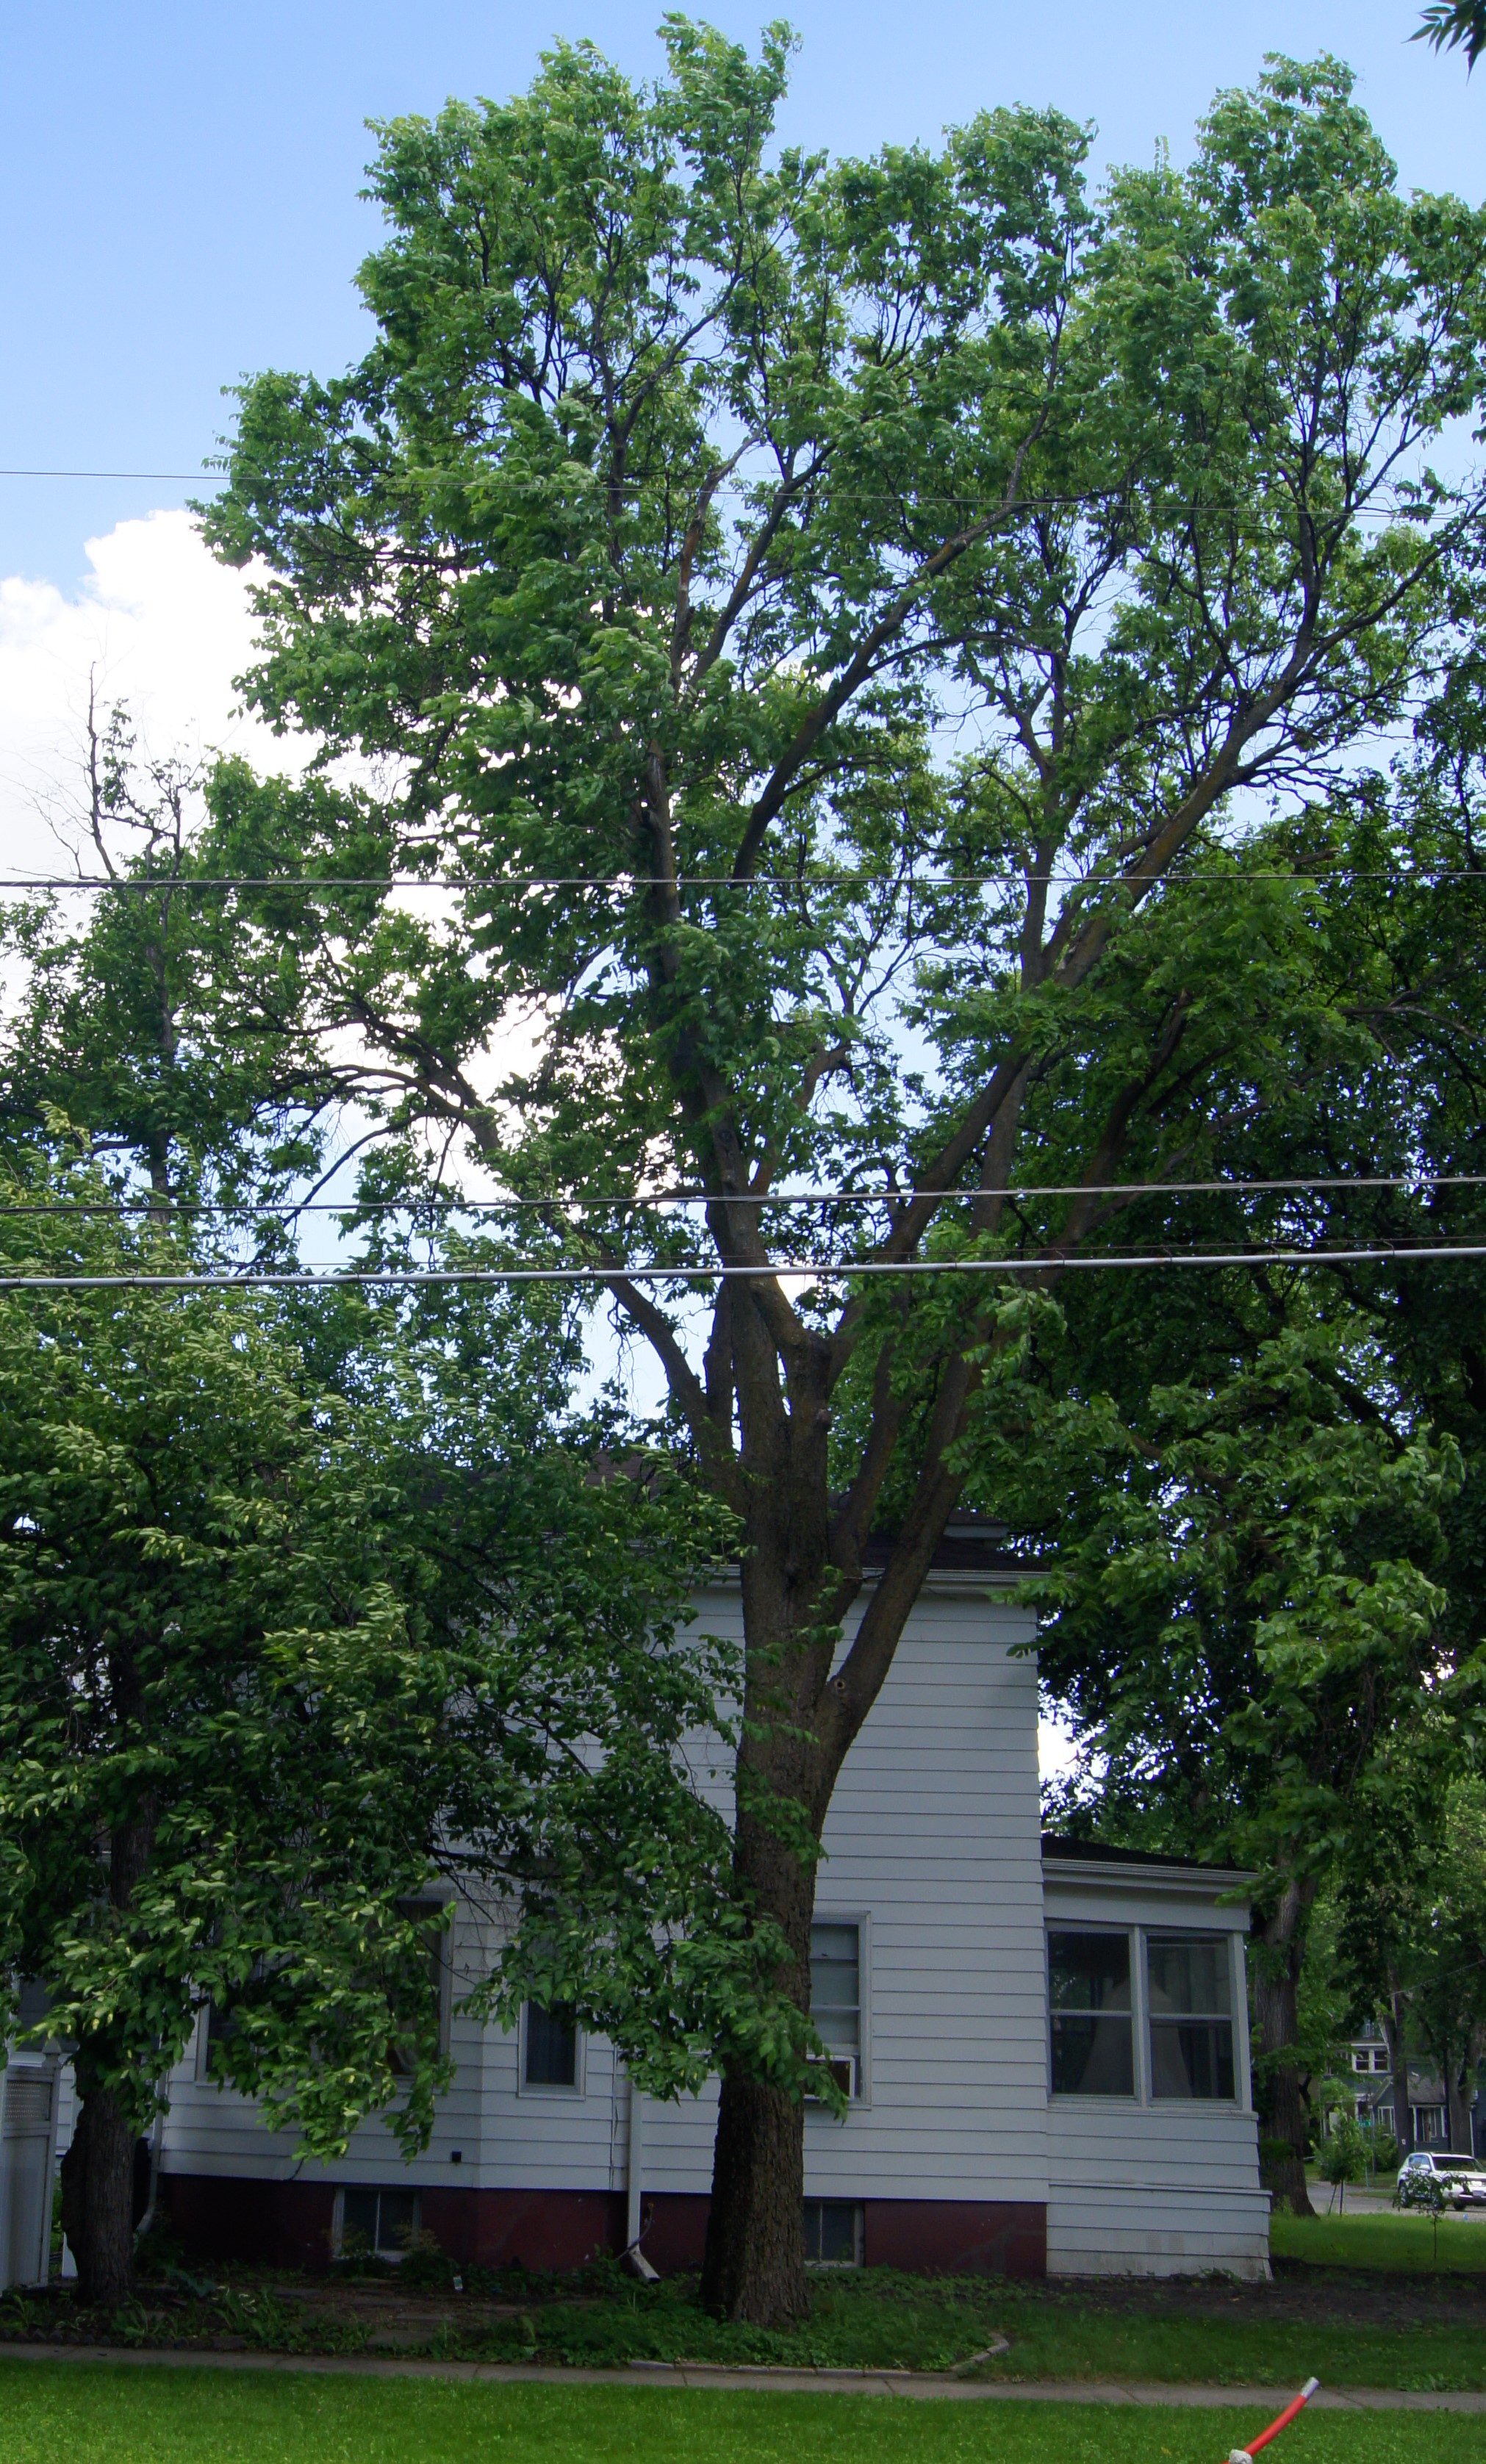 The North Dakota state champion ironwood tree is located on private property in Fargo. (NDSU photo)